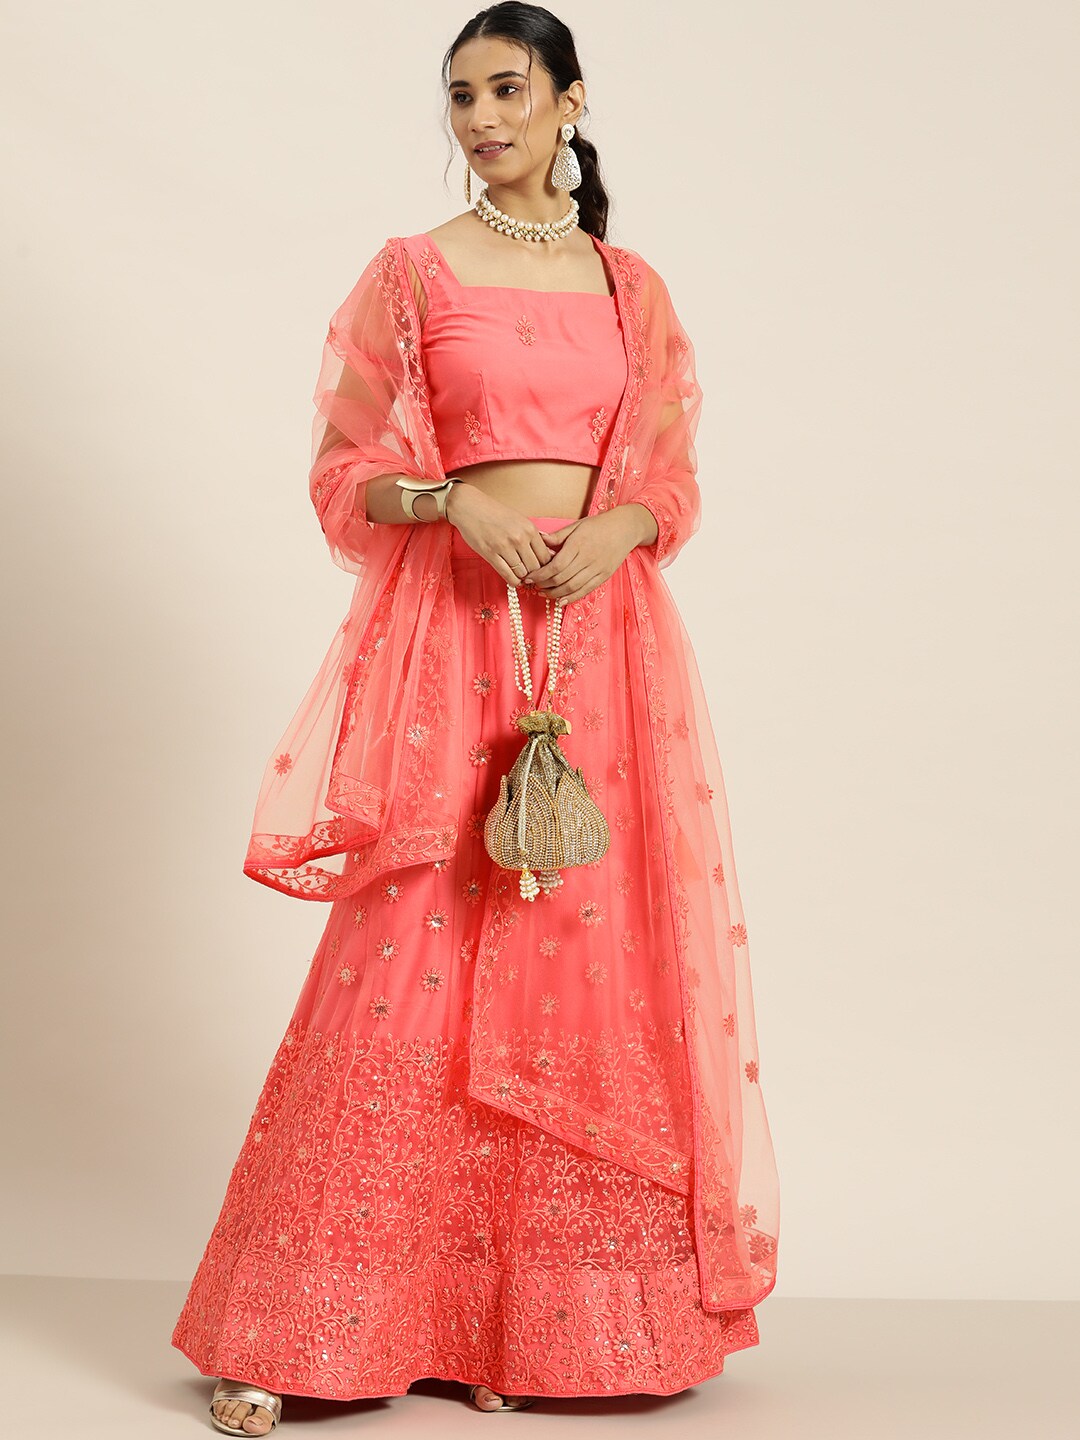 Sangria Peach-Coloured Embroidered Beads and Stones Semi-Stitched Lehenga & Unstitched Blouse With Dupatta Price in India